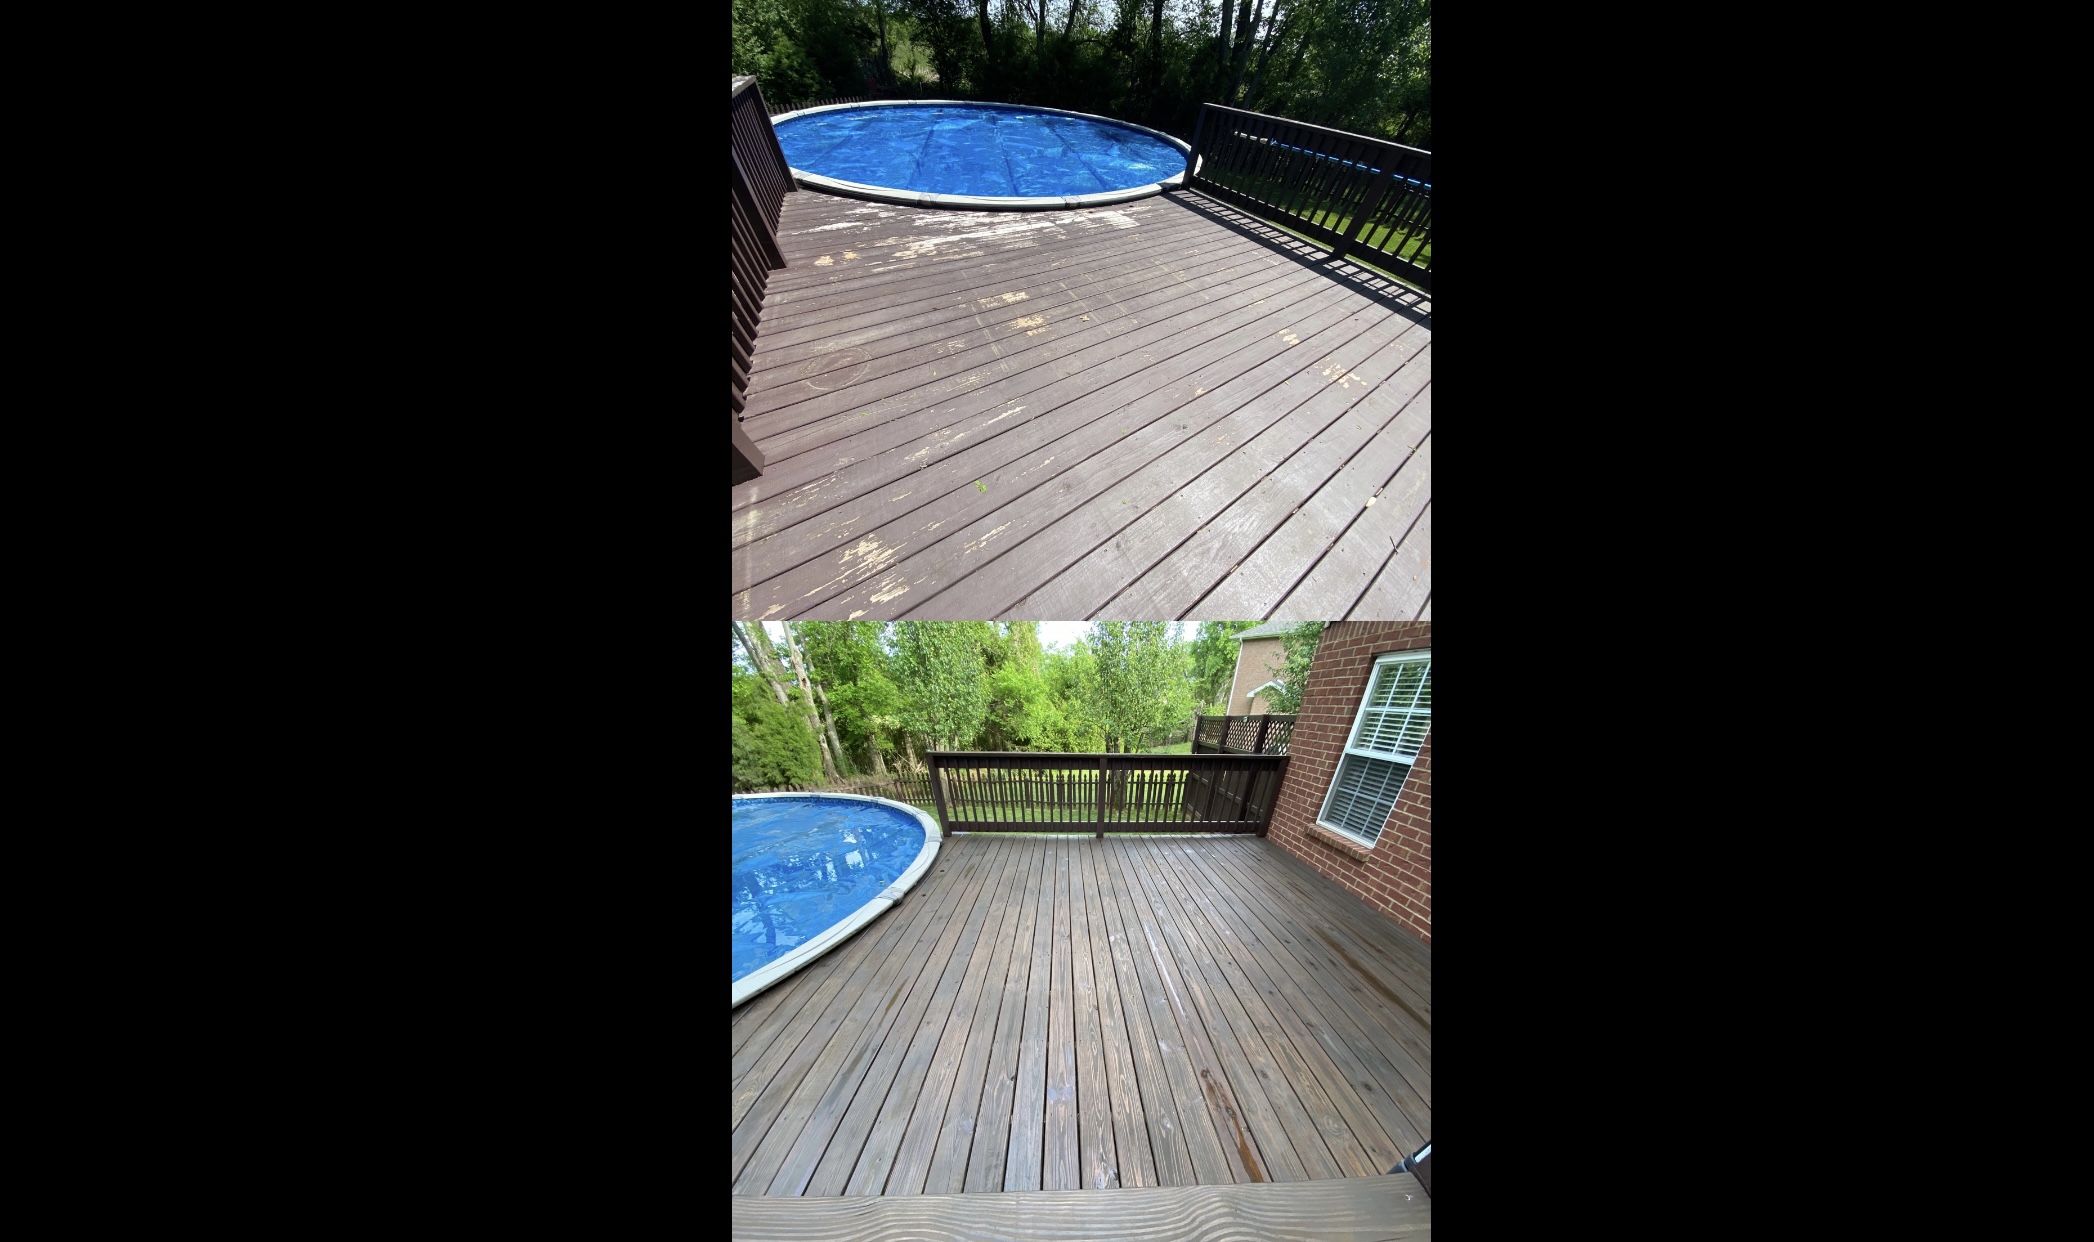 McCoys Fence and Deck Staining - Nashville, TN, US, deck staining